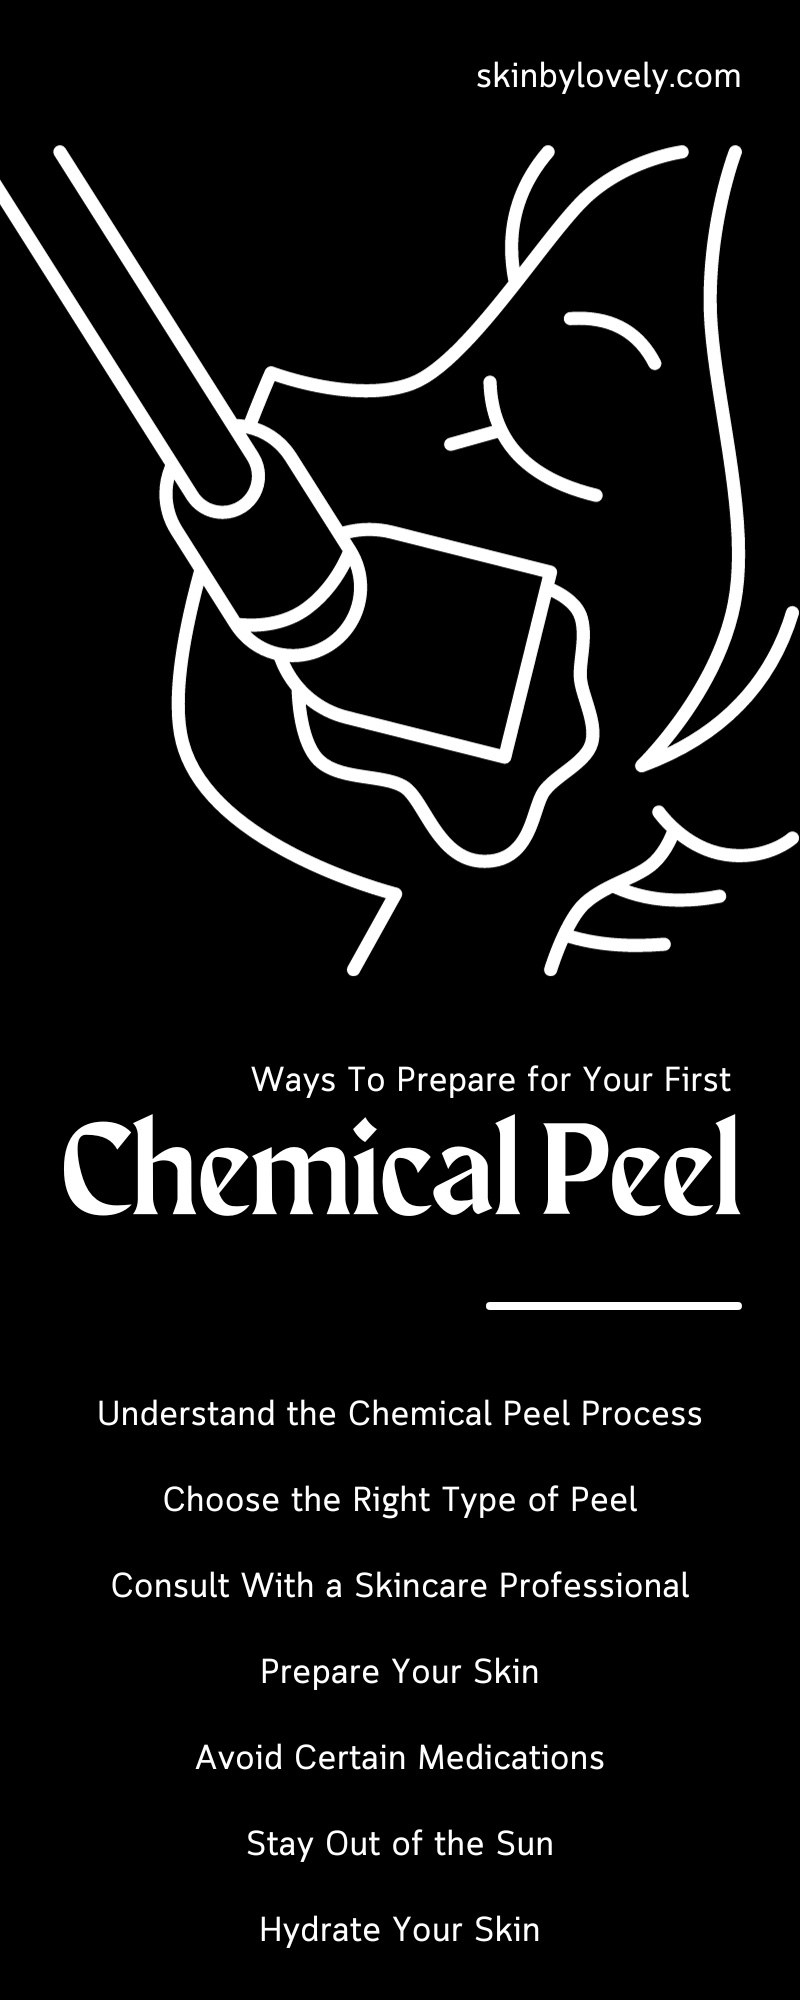 13 Ways To Prepare for Your First Chemical Peel